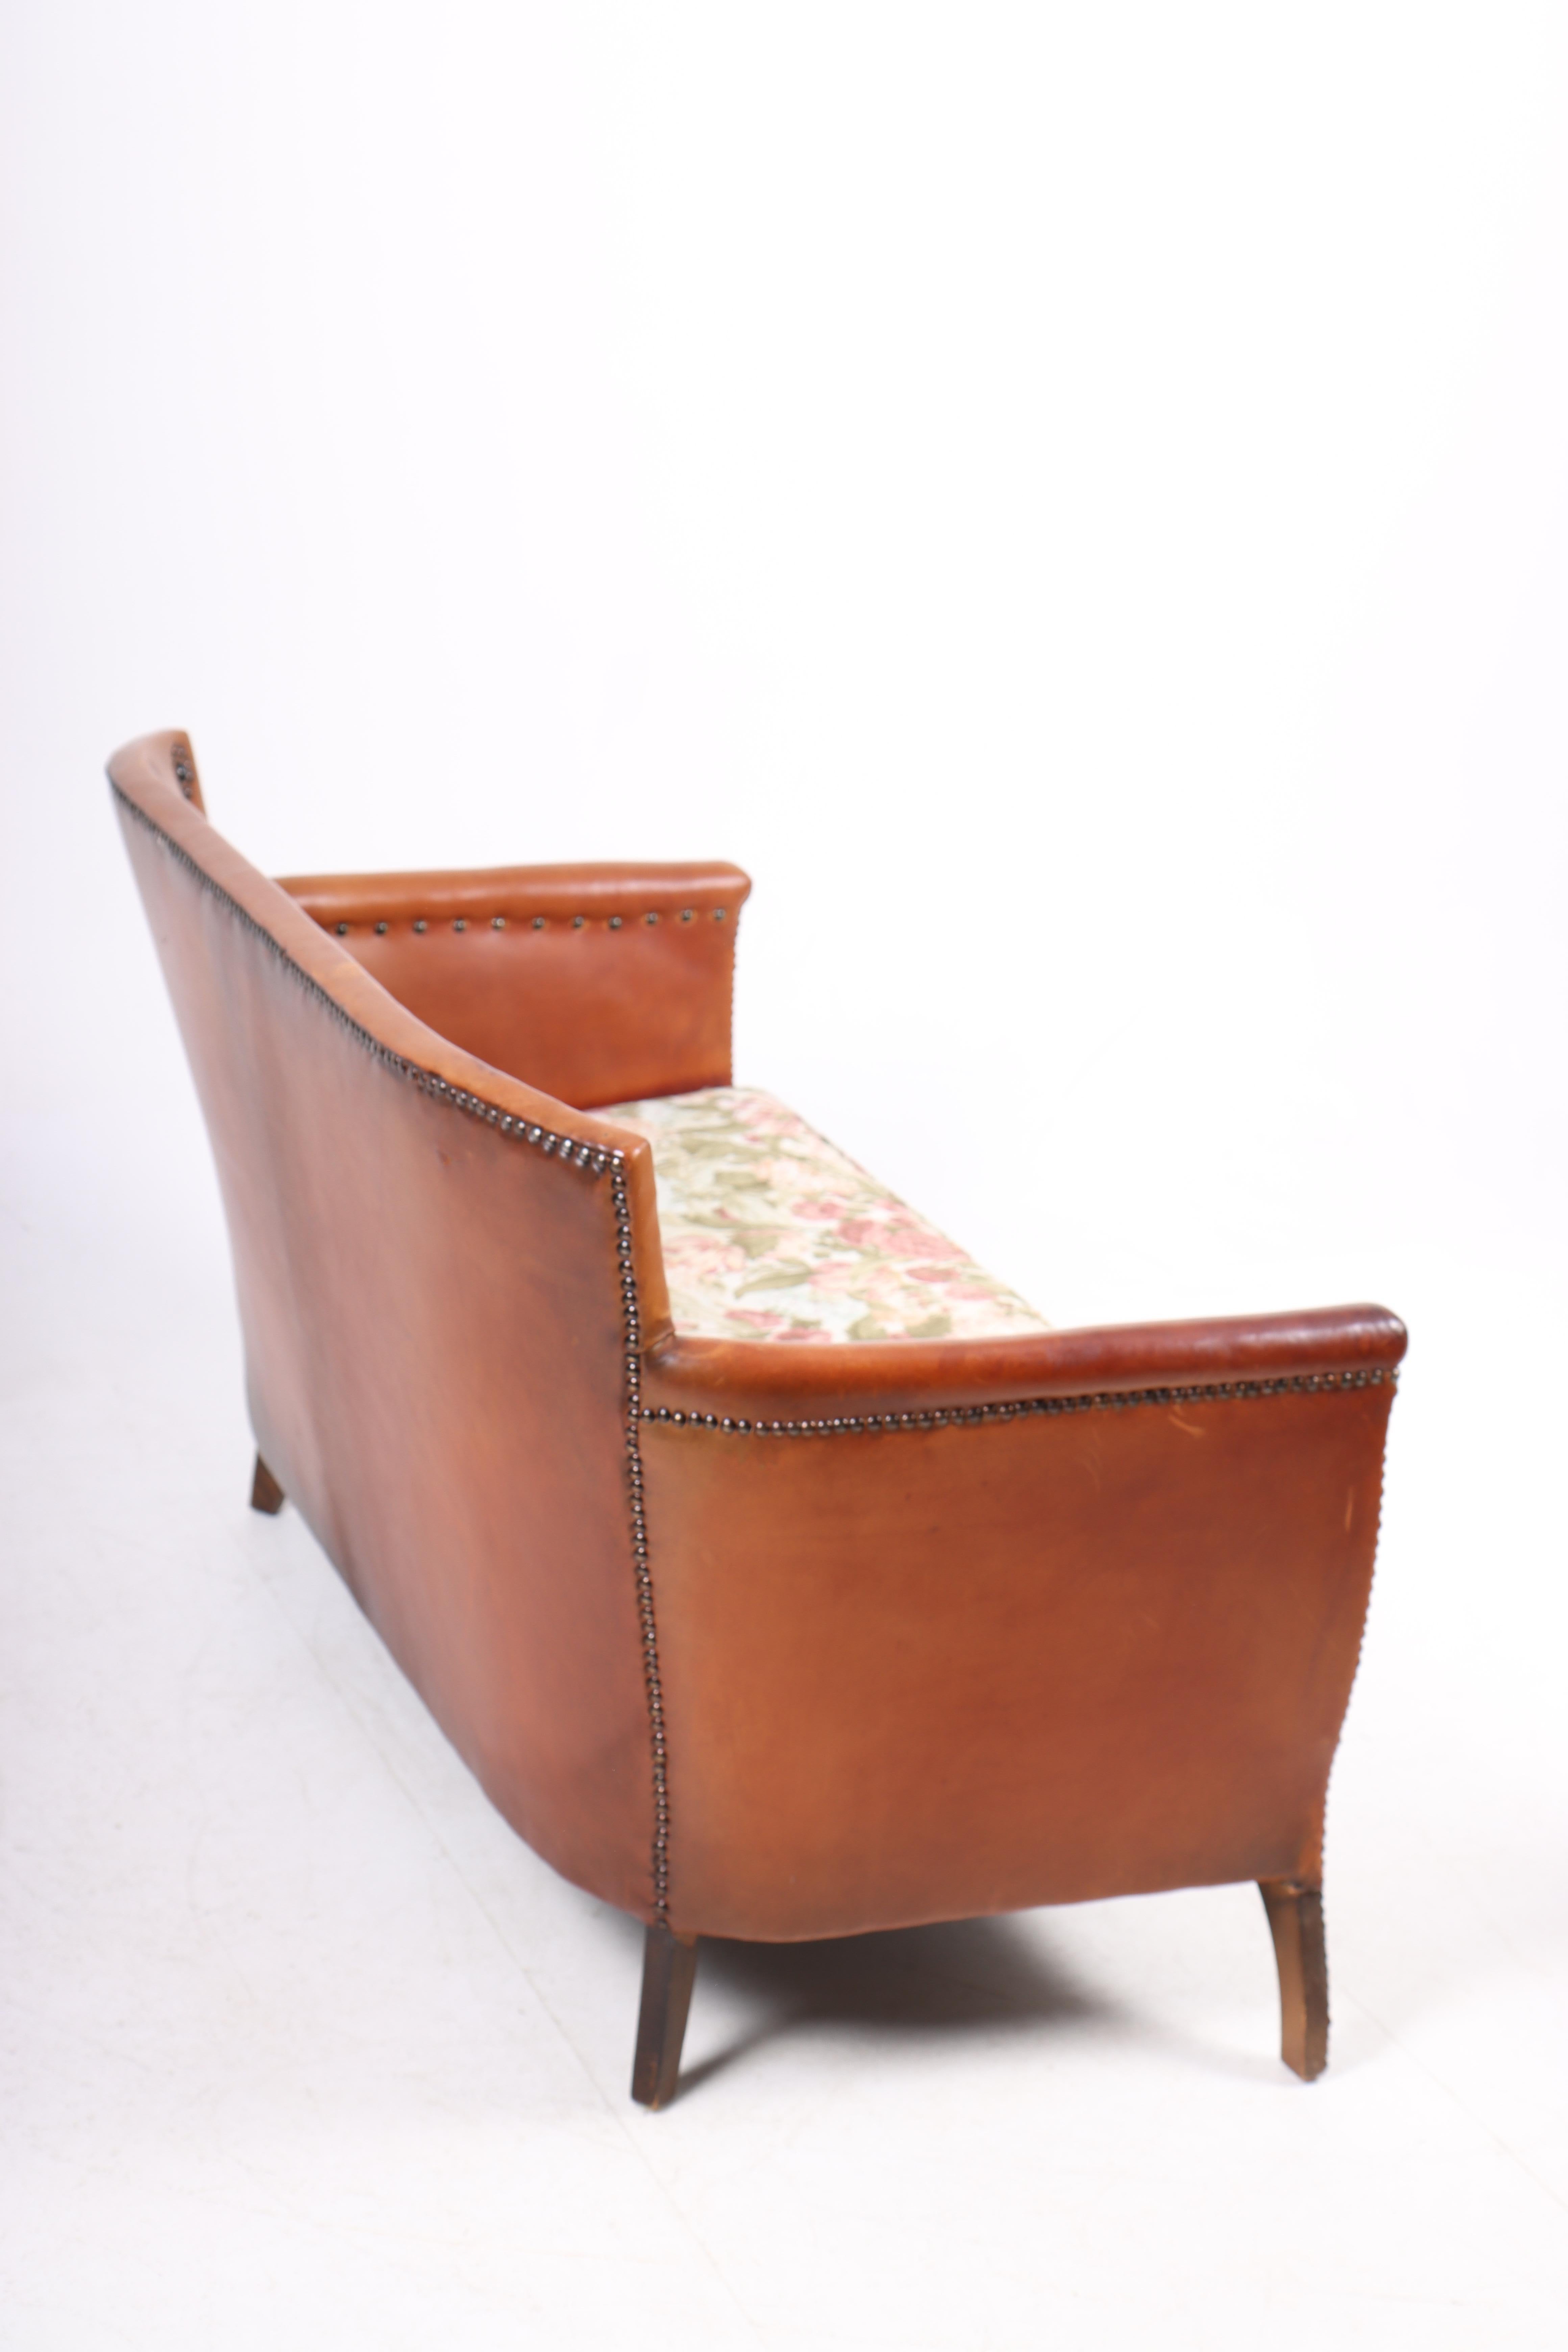 Mid-20th Century Sofa in Patinated Leather and Fabric, Designed by Otto Schulz